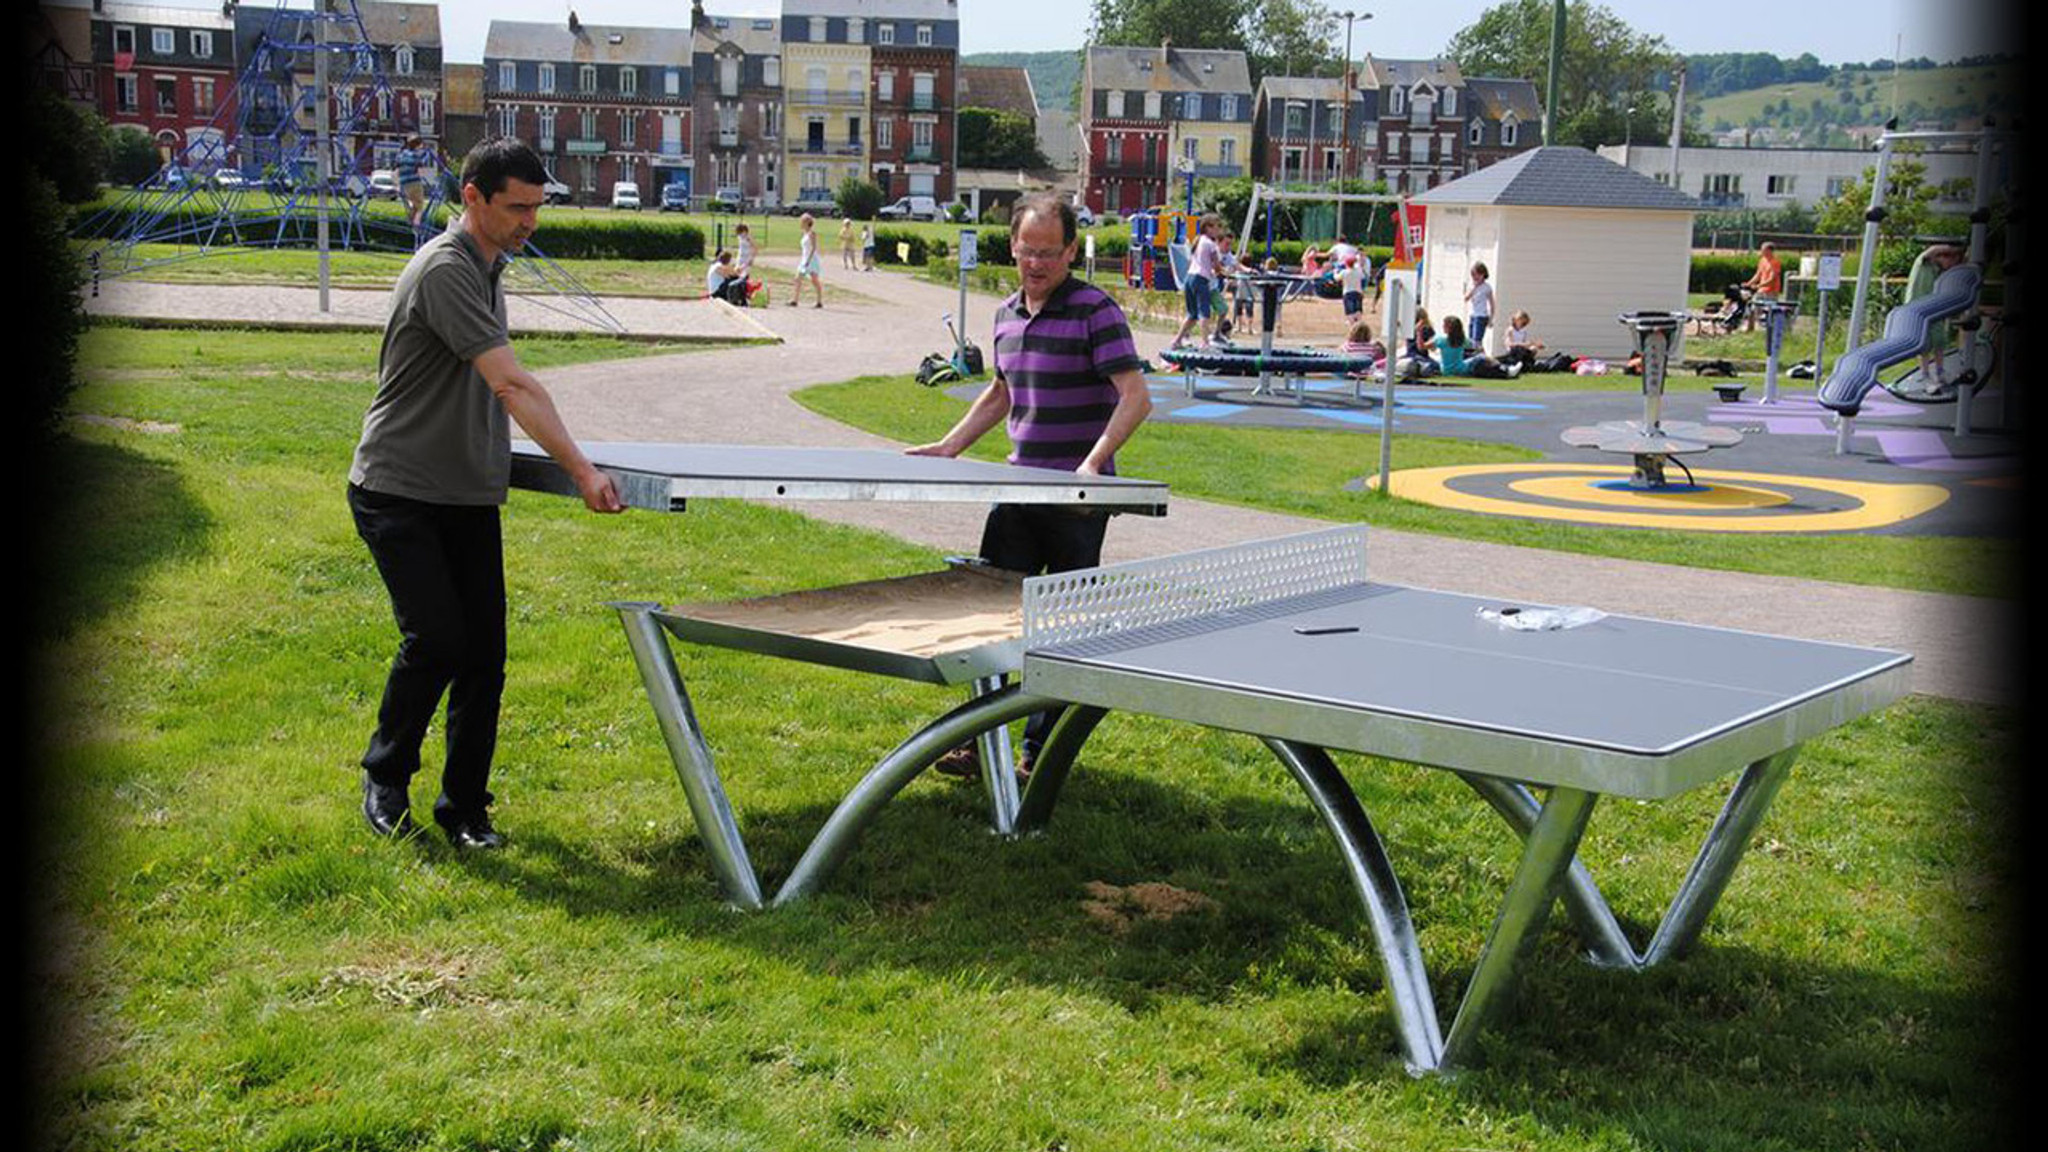 Park Outdoor Table Tennis Table